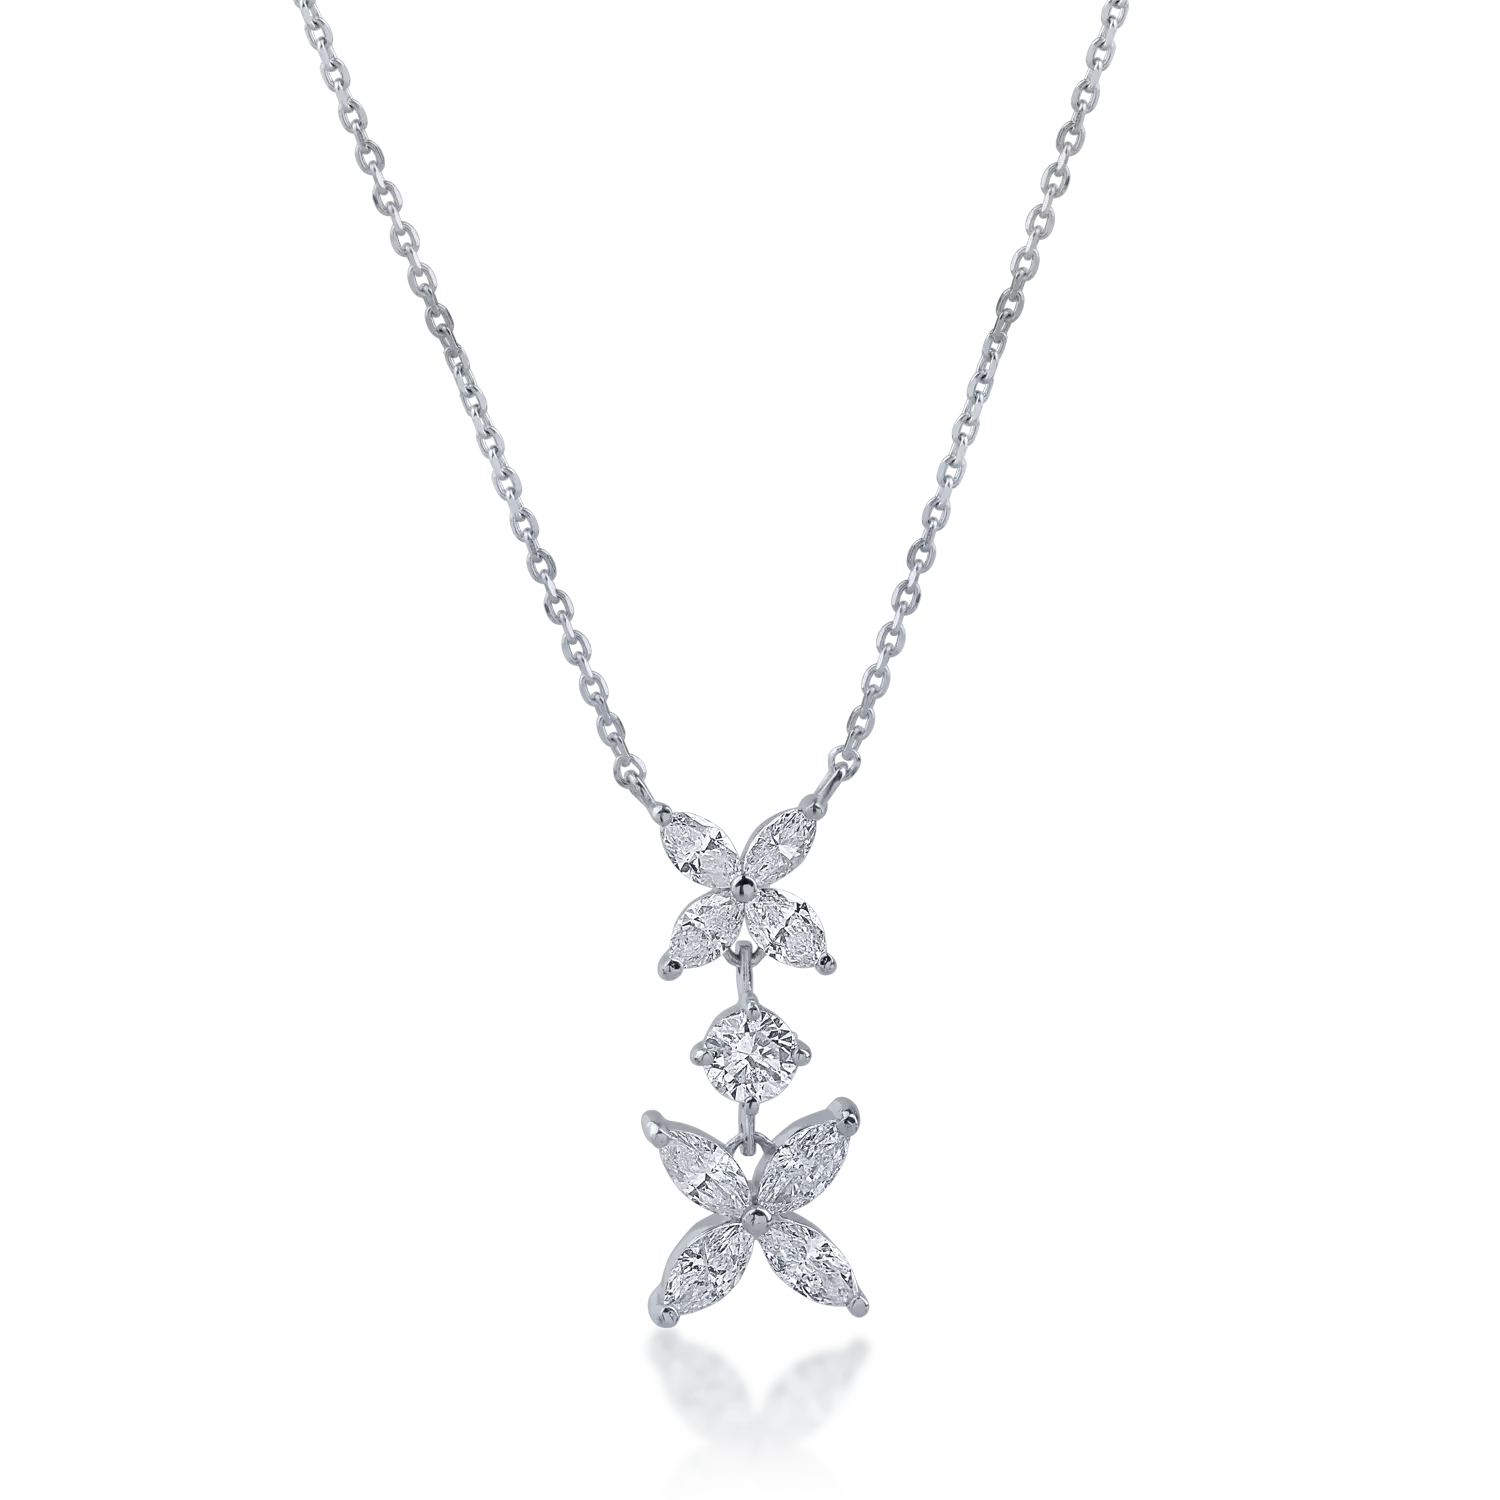 White gold flowers pendant necklace with 0.6ct diamonds